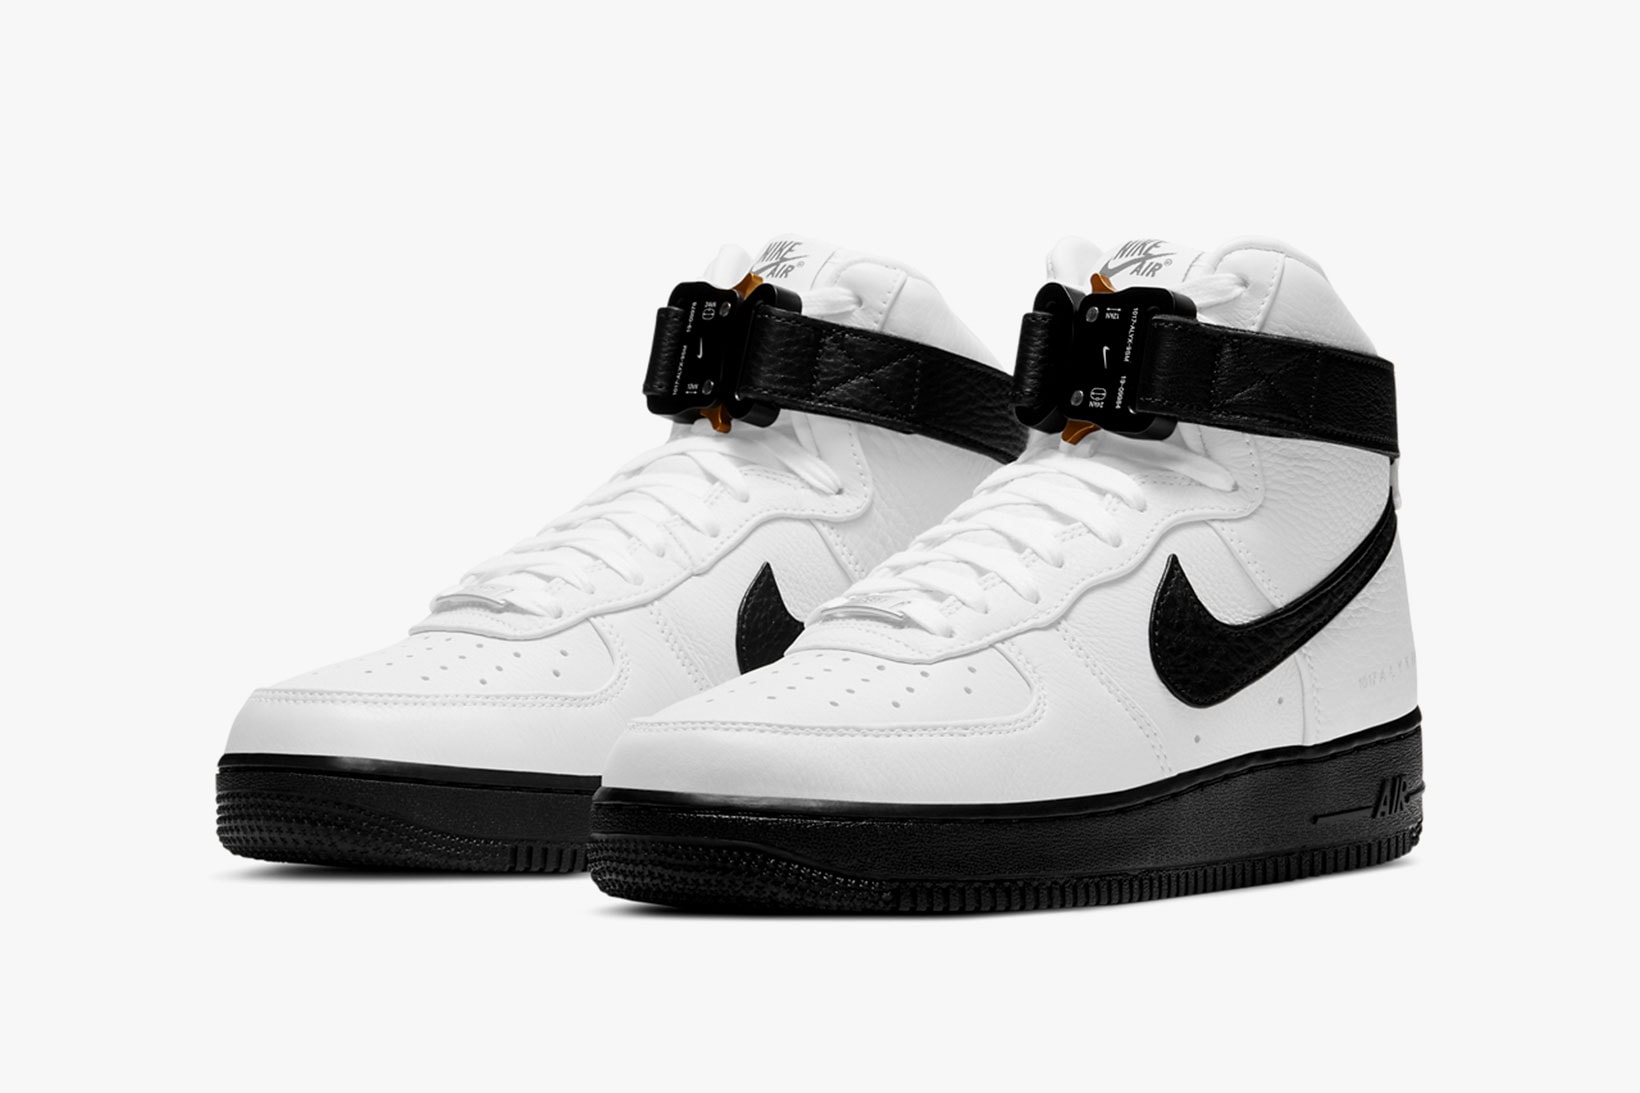 1017 alyx 9sm nike air force 1 af1 high collaboration white black sneakers release date matthew williams